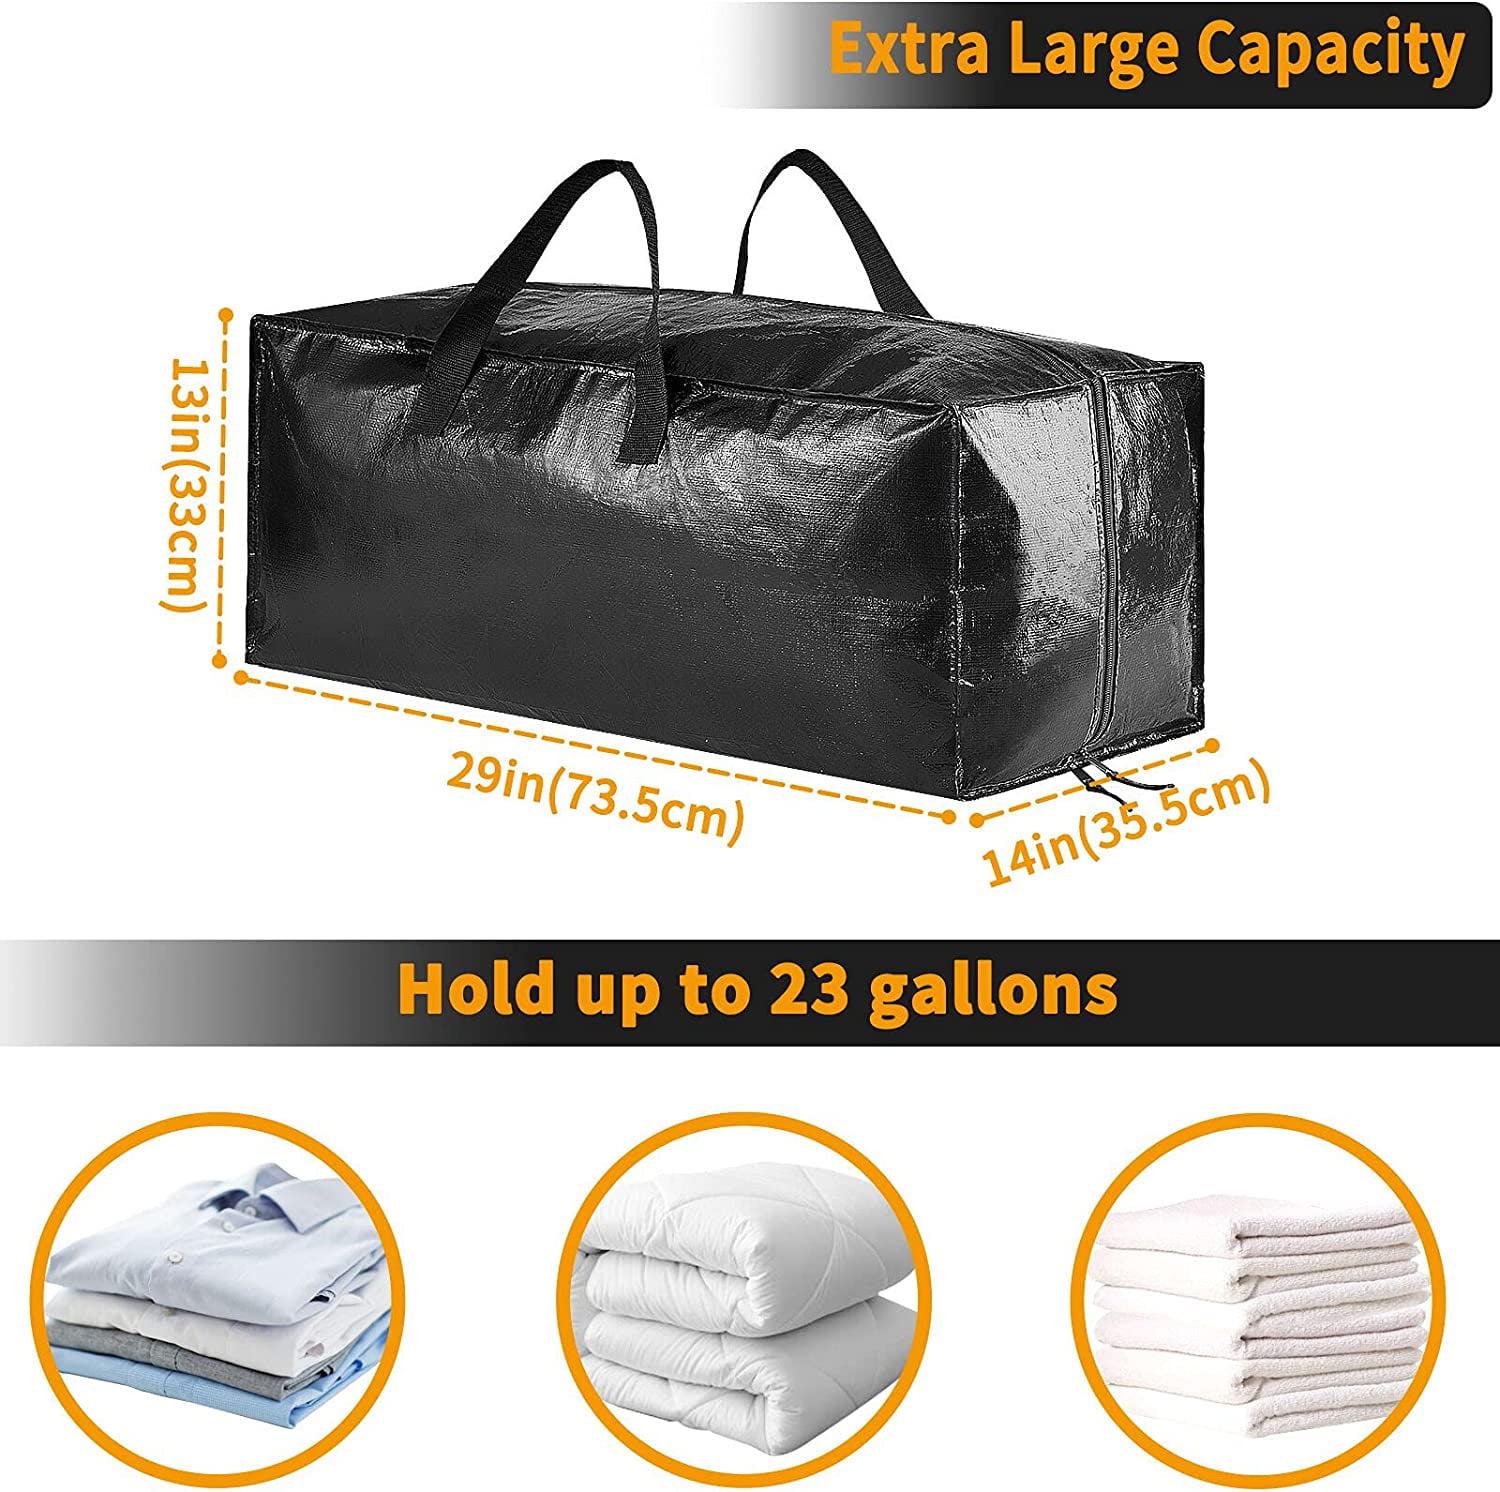 GZBtech 4 Pcs Heavy Duty Moving Bags,Large Waterproof Storage Bag with Handles and Zippers for House Moving Camping Packing Clothes Bedding, Adult Unisex